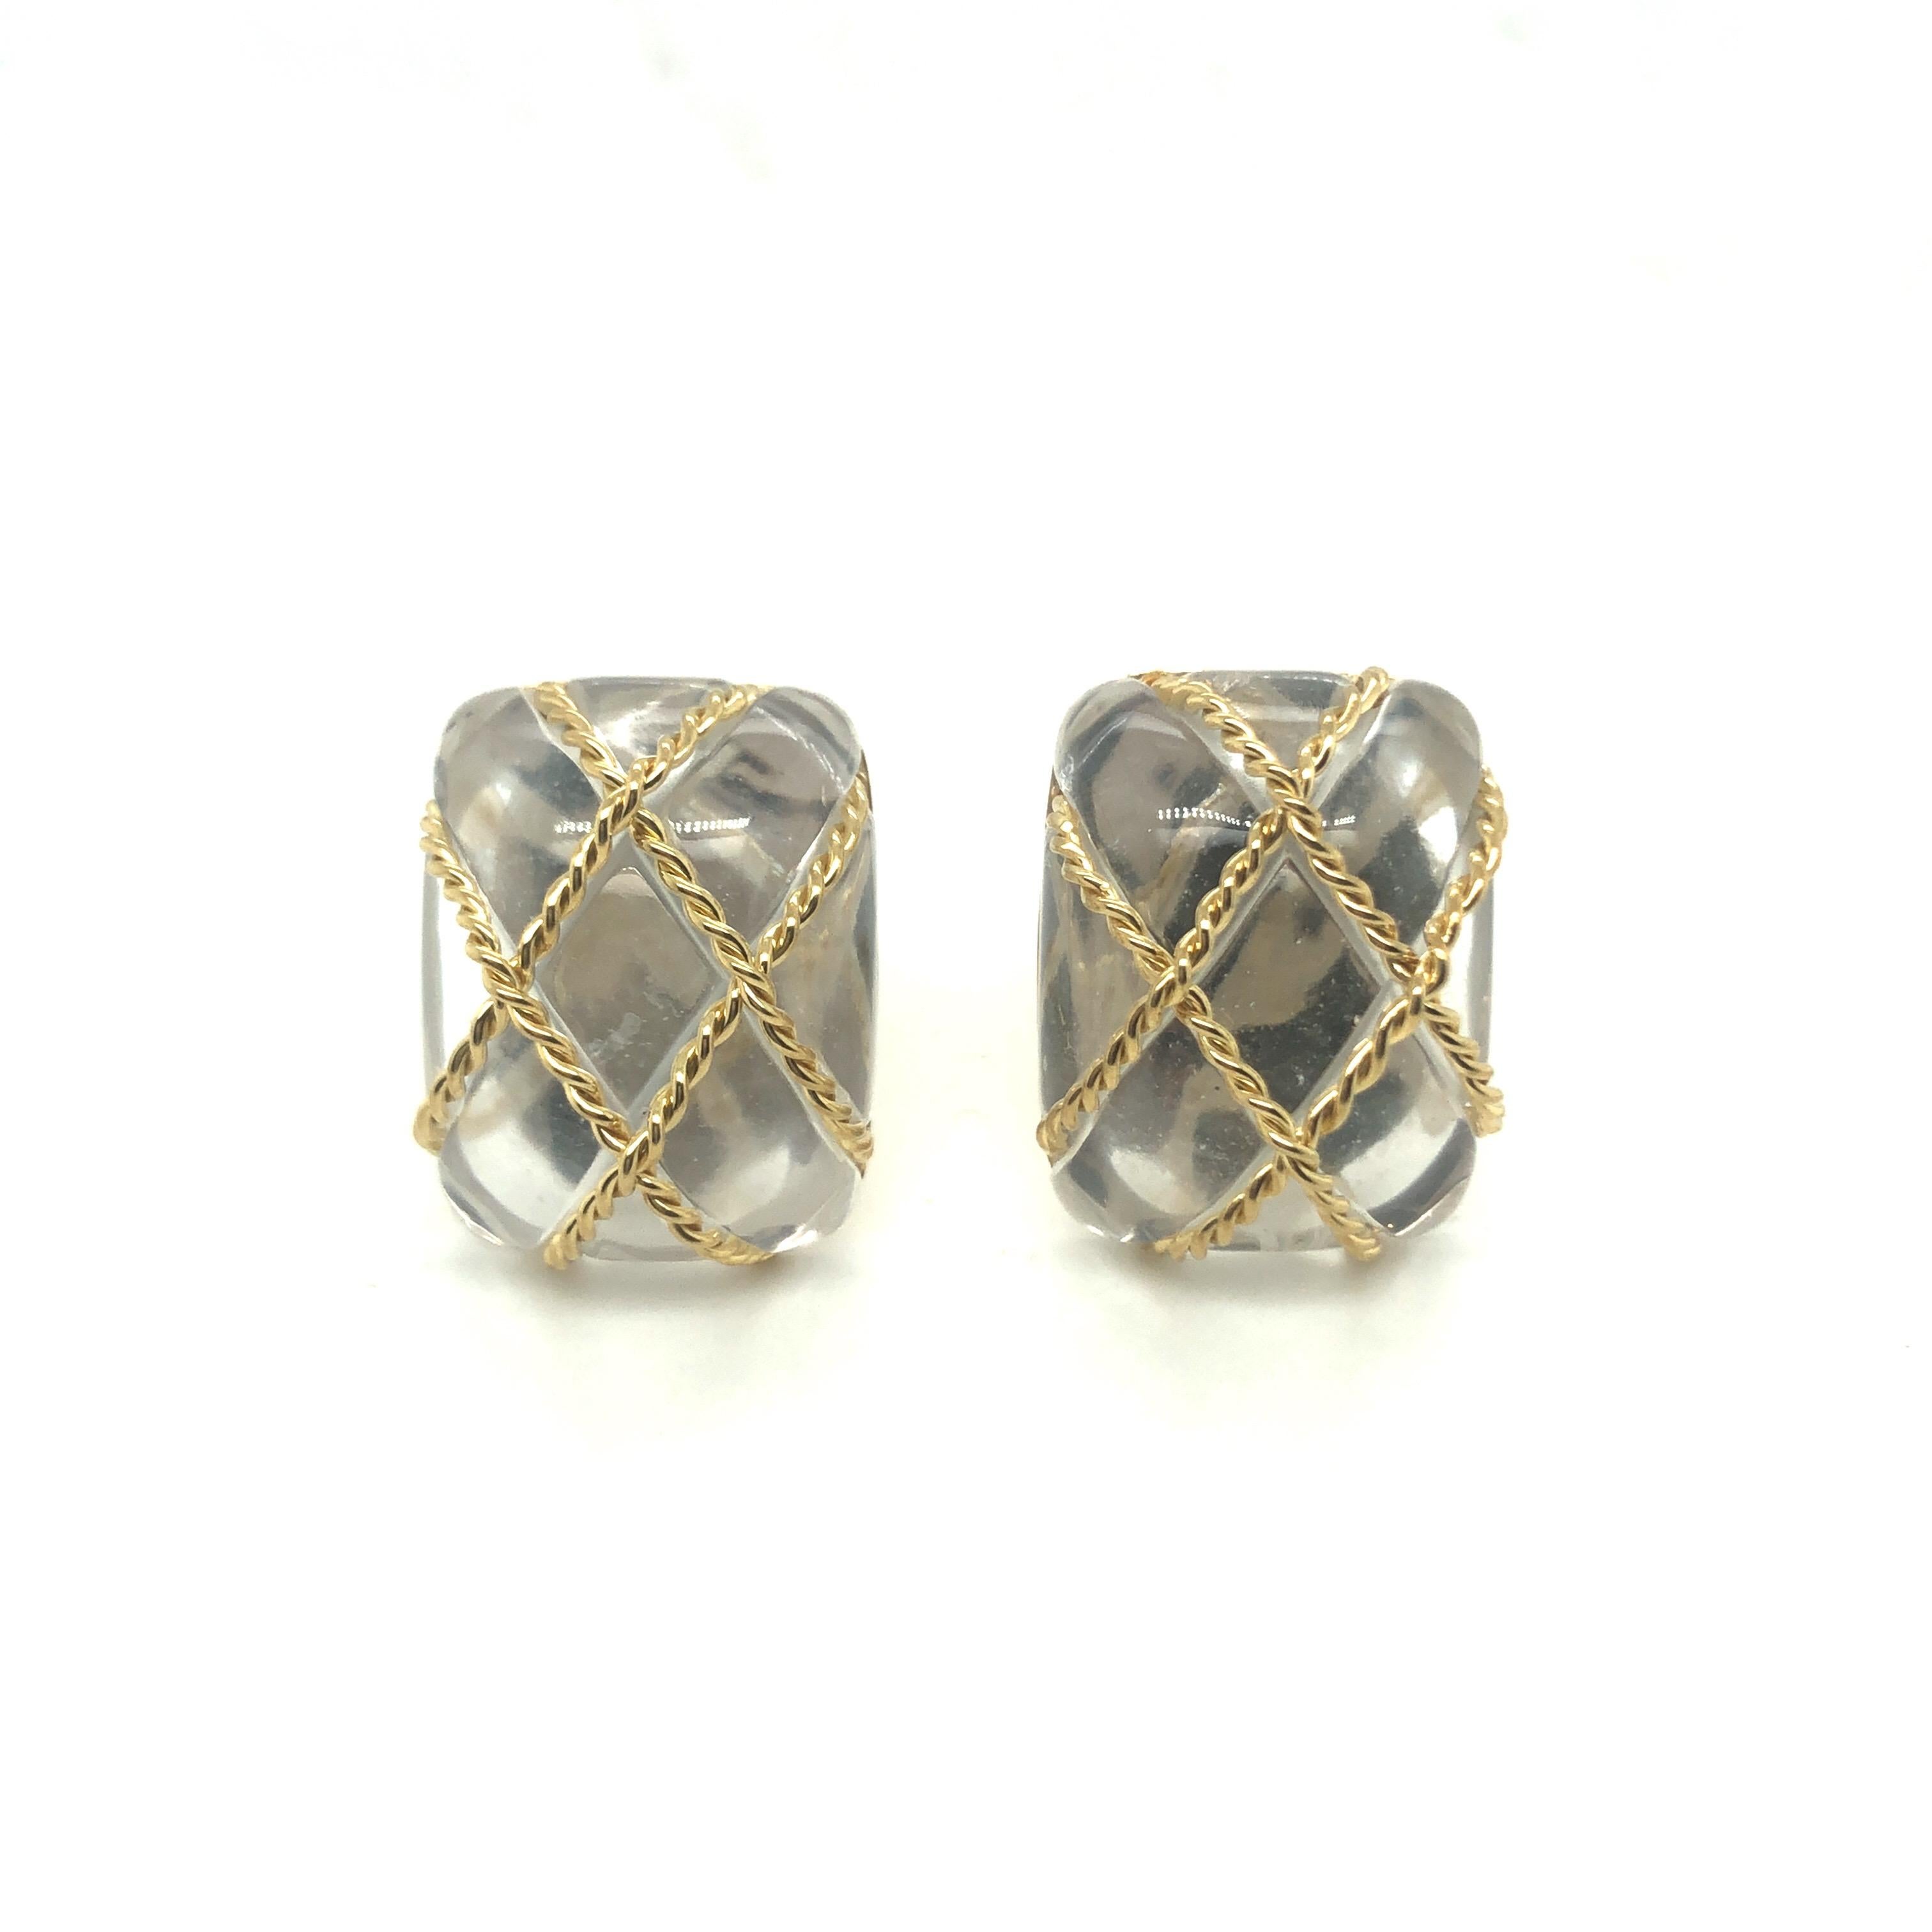 Fabulous pair of 18 karat yellow gold and rock crystal cage earrings by American jeweler Seaman Schepps.
Crafted in 18 karat yellow gold, each earring featuring a large cushion-shape rock crystal cabochon trapped in a cage of twisted gold wires. The